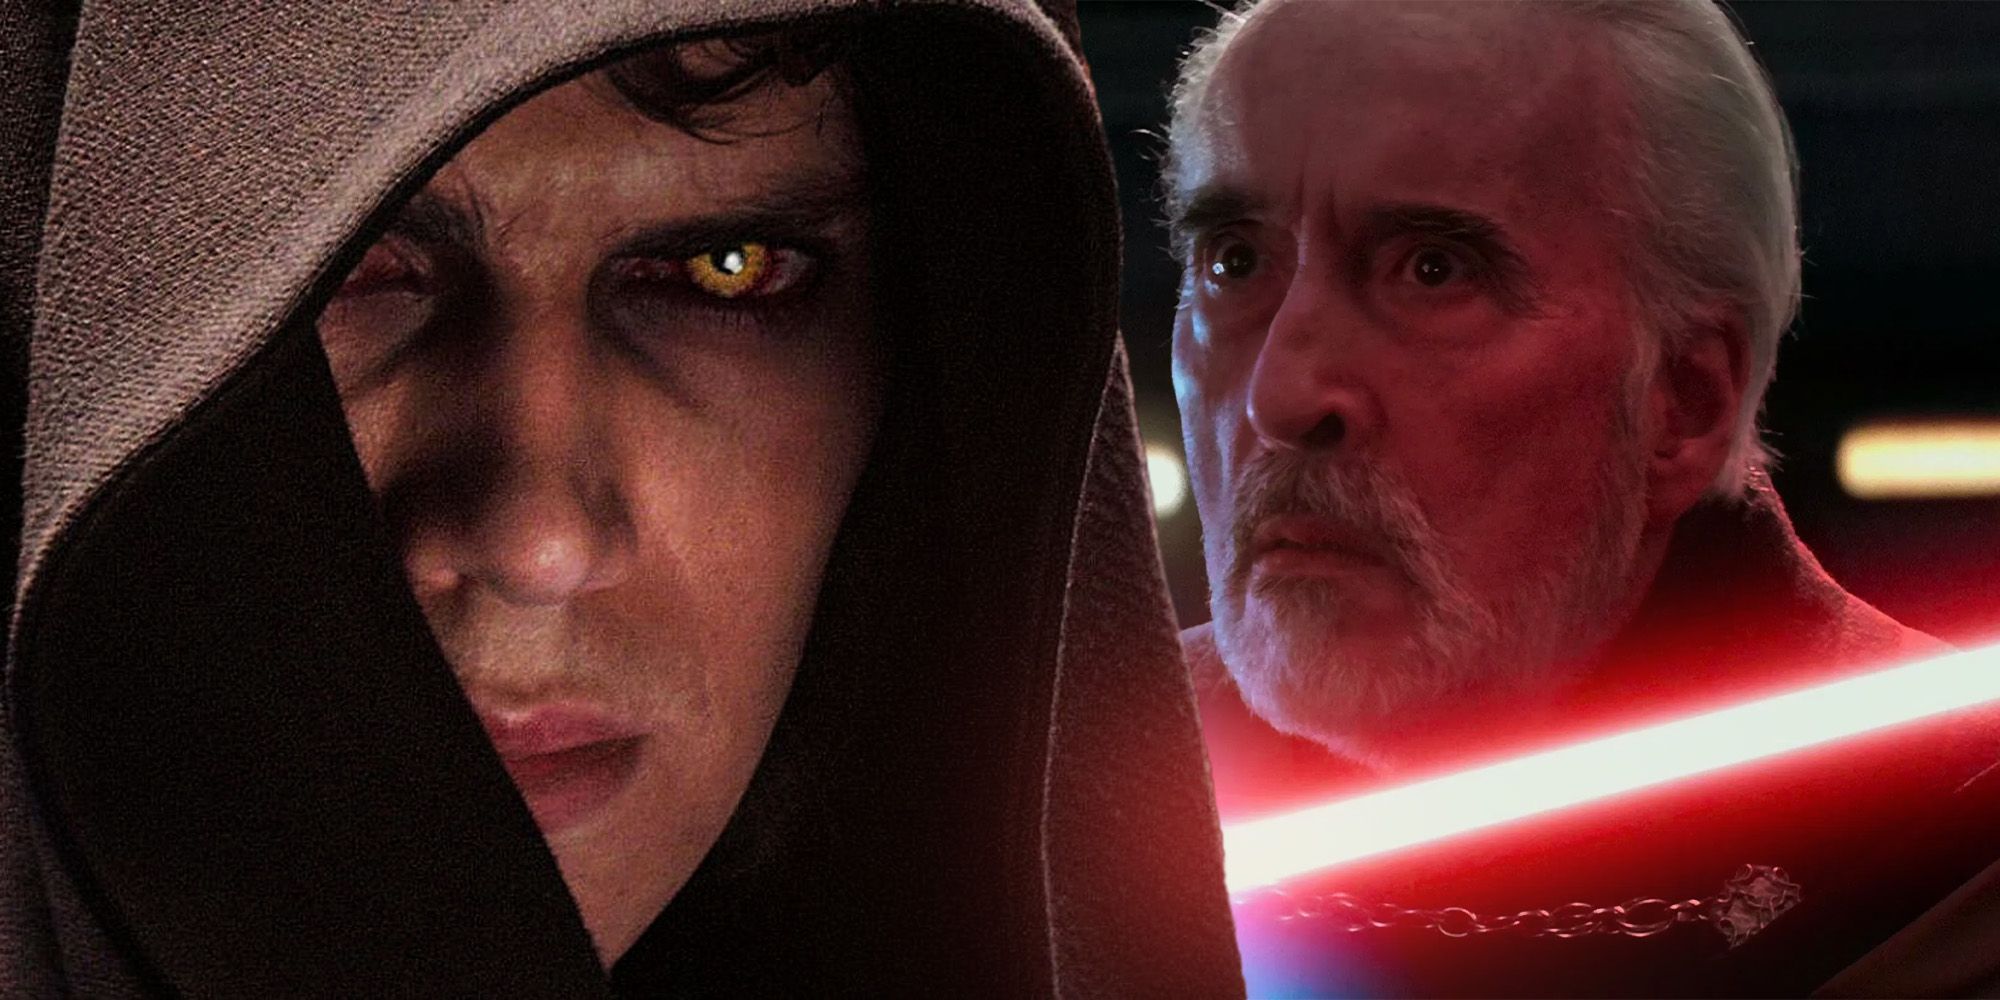 Why Count Dooku Didnt Have Star Wars Sith Eyes (Like Anakin)